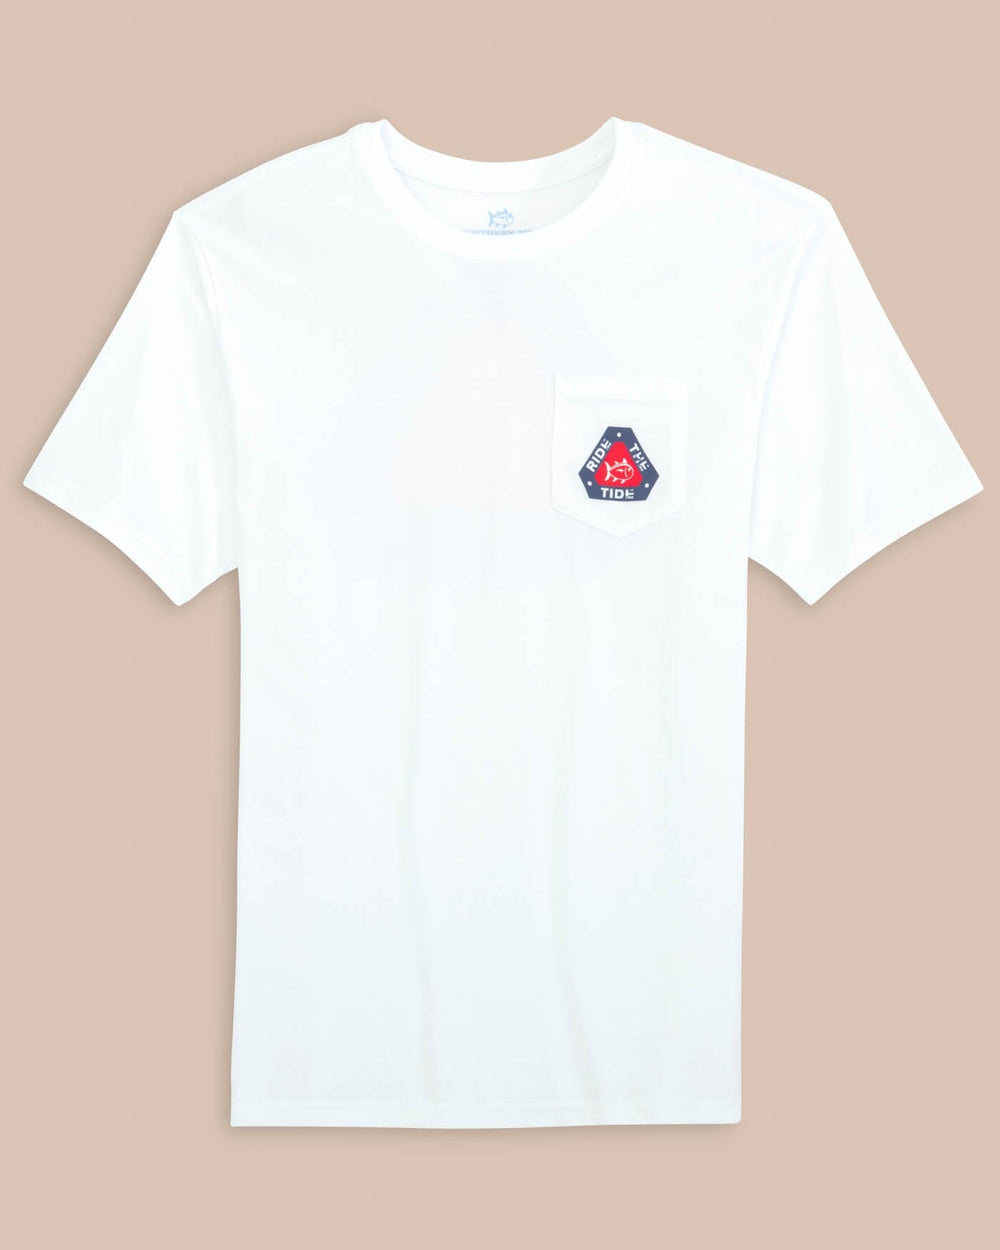 The front view of the Southern Tide Ride the Tide Triangle Short Sleeve T-Shirt by Southern Tide - Classic White